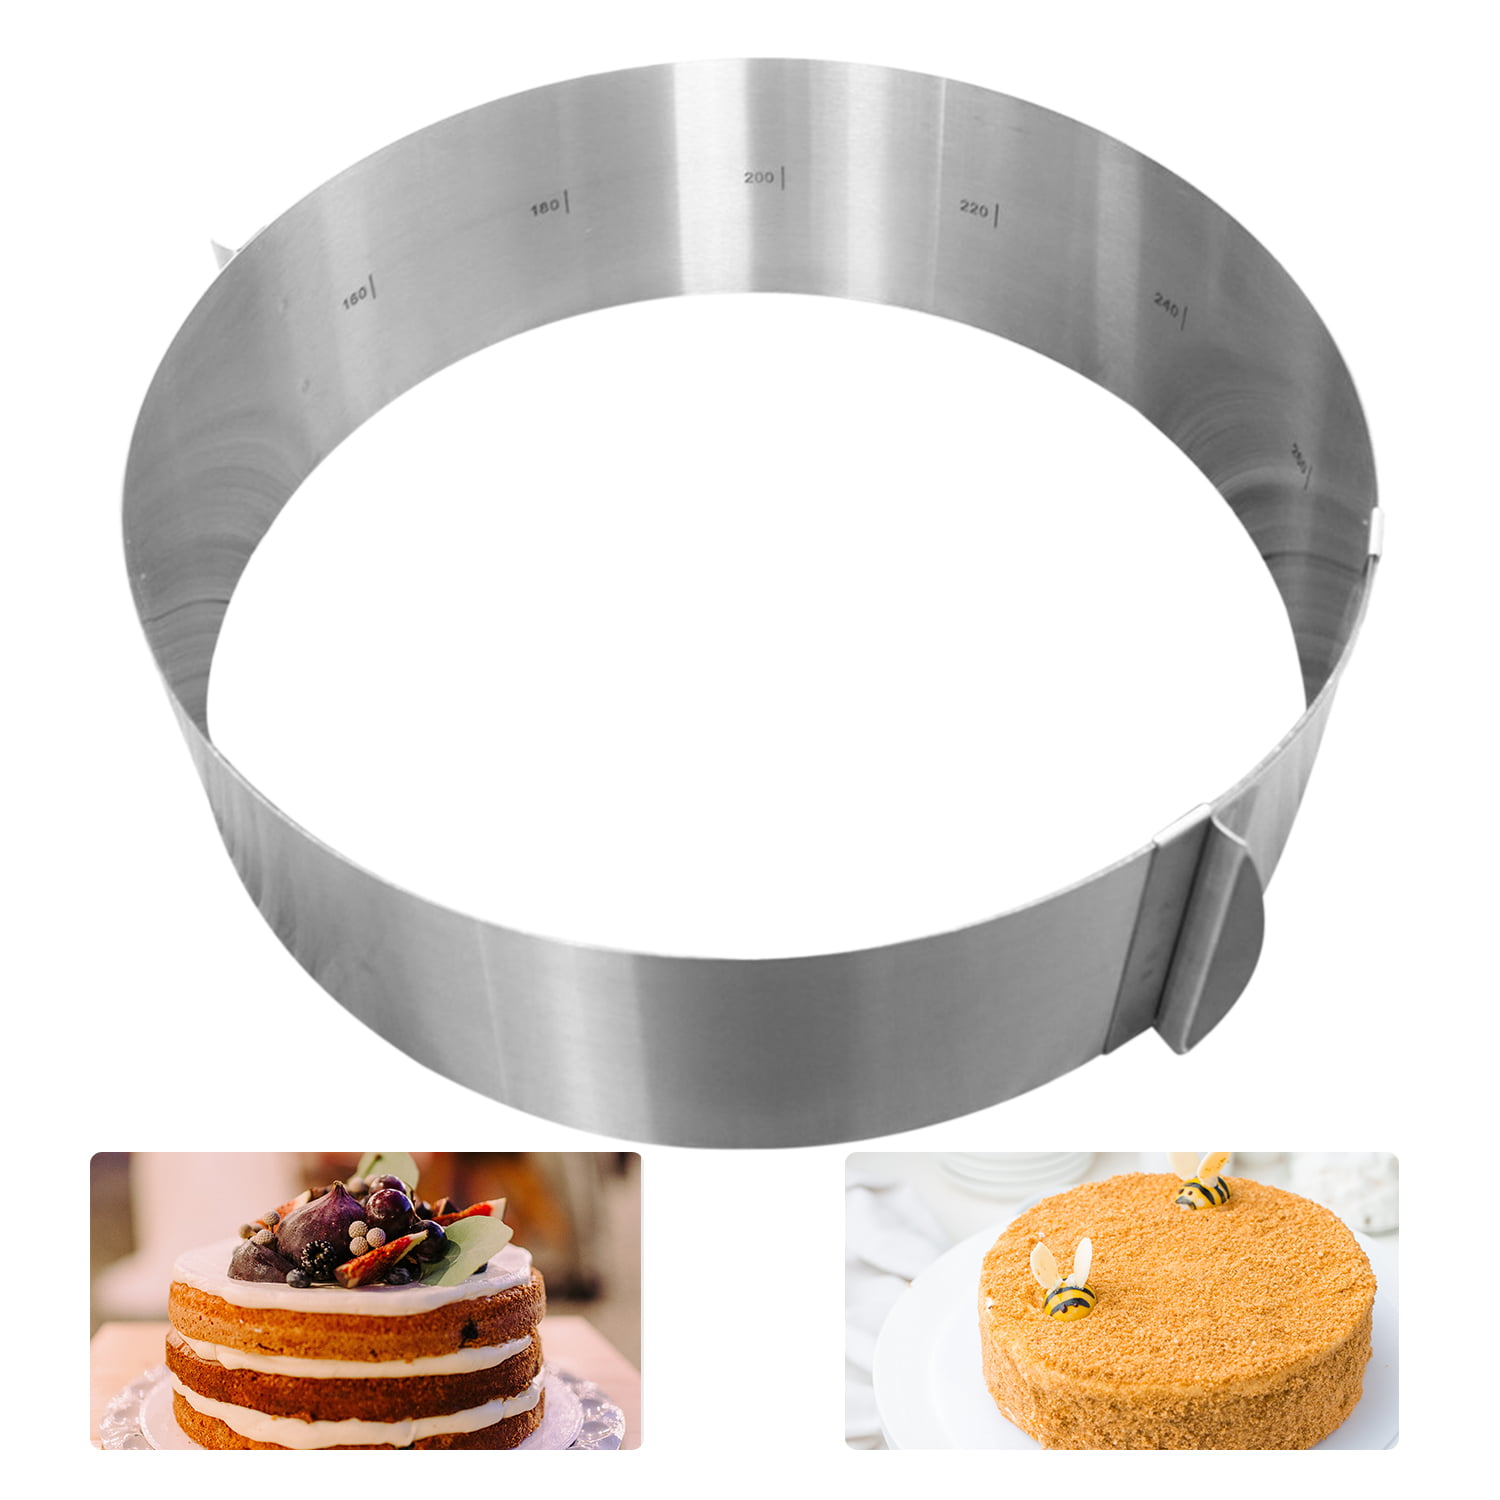 Round Mousse Mould Cake Stainless Steel Ring Pastry Tool 1Pcs Mold Baking V2Q1